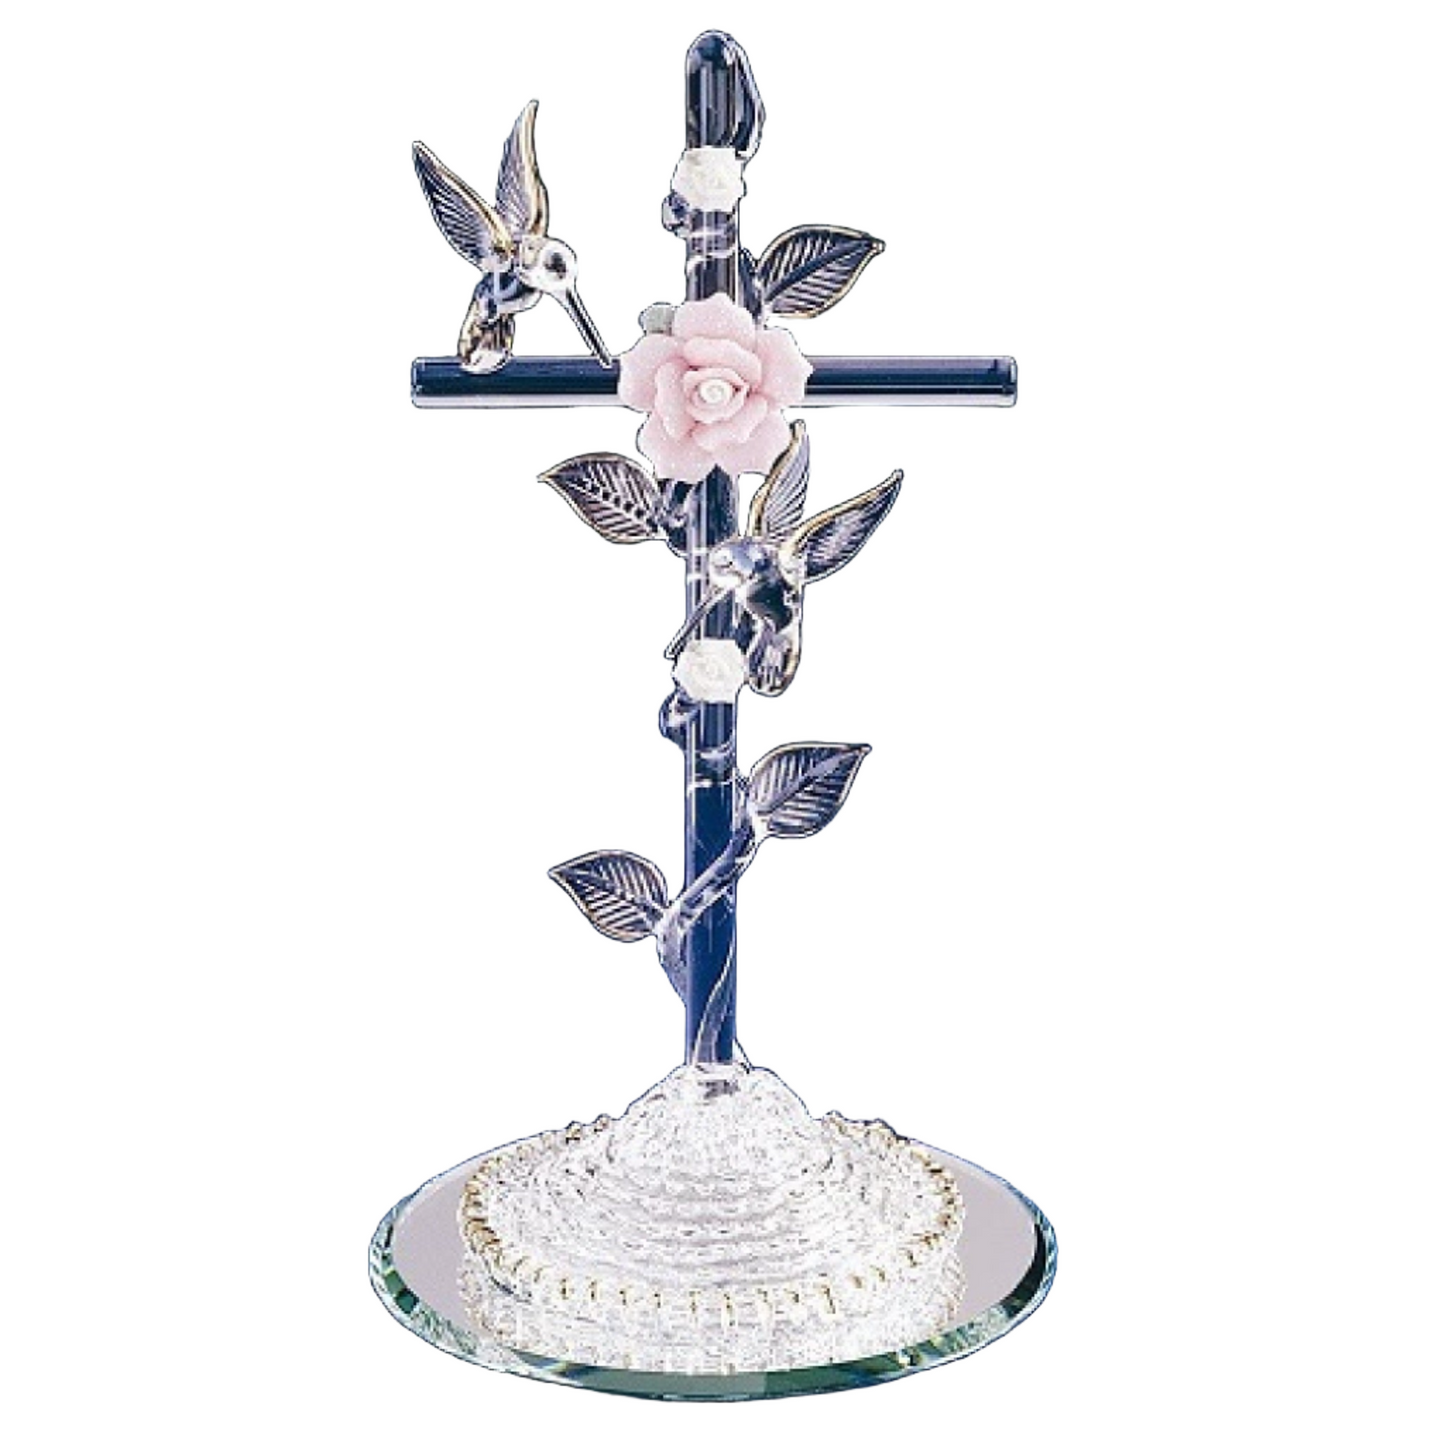 Glass Baron Cross with Pink Rose and Hummingbirds figurine